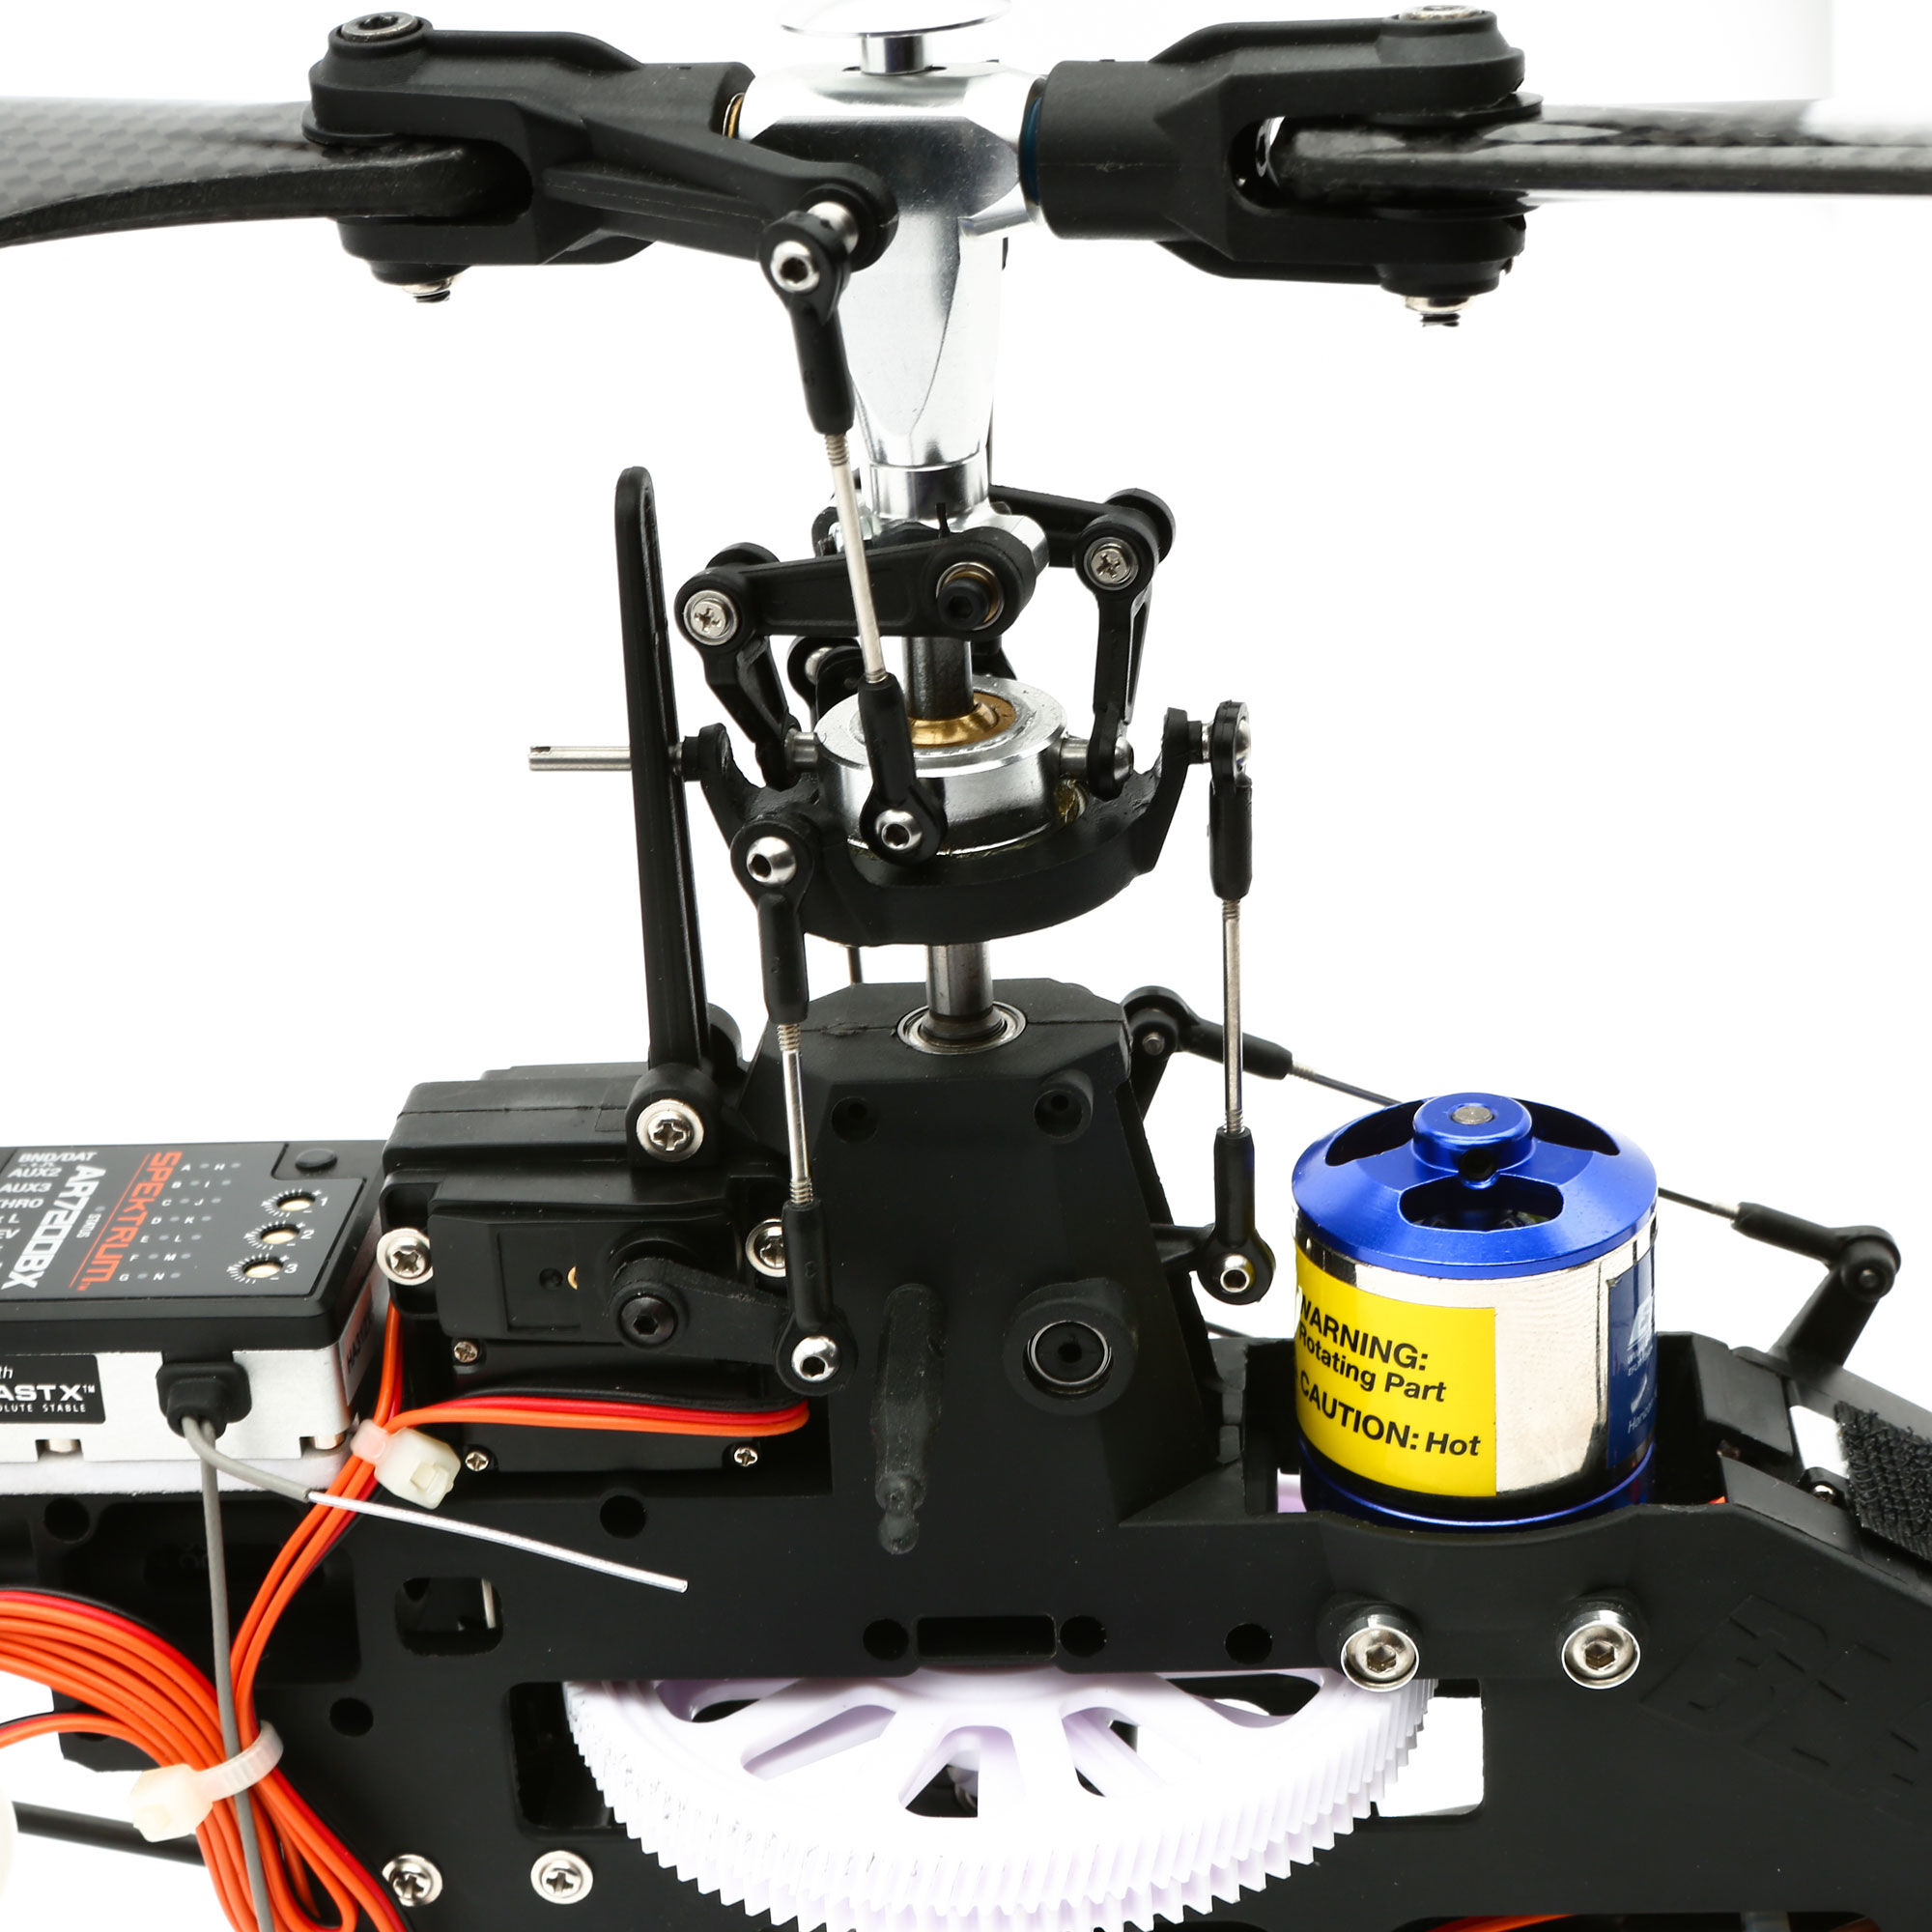 450 rc helicopter